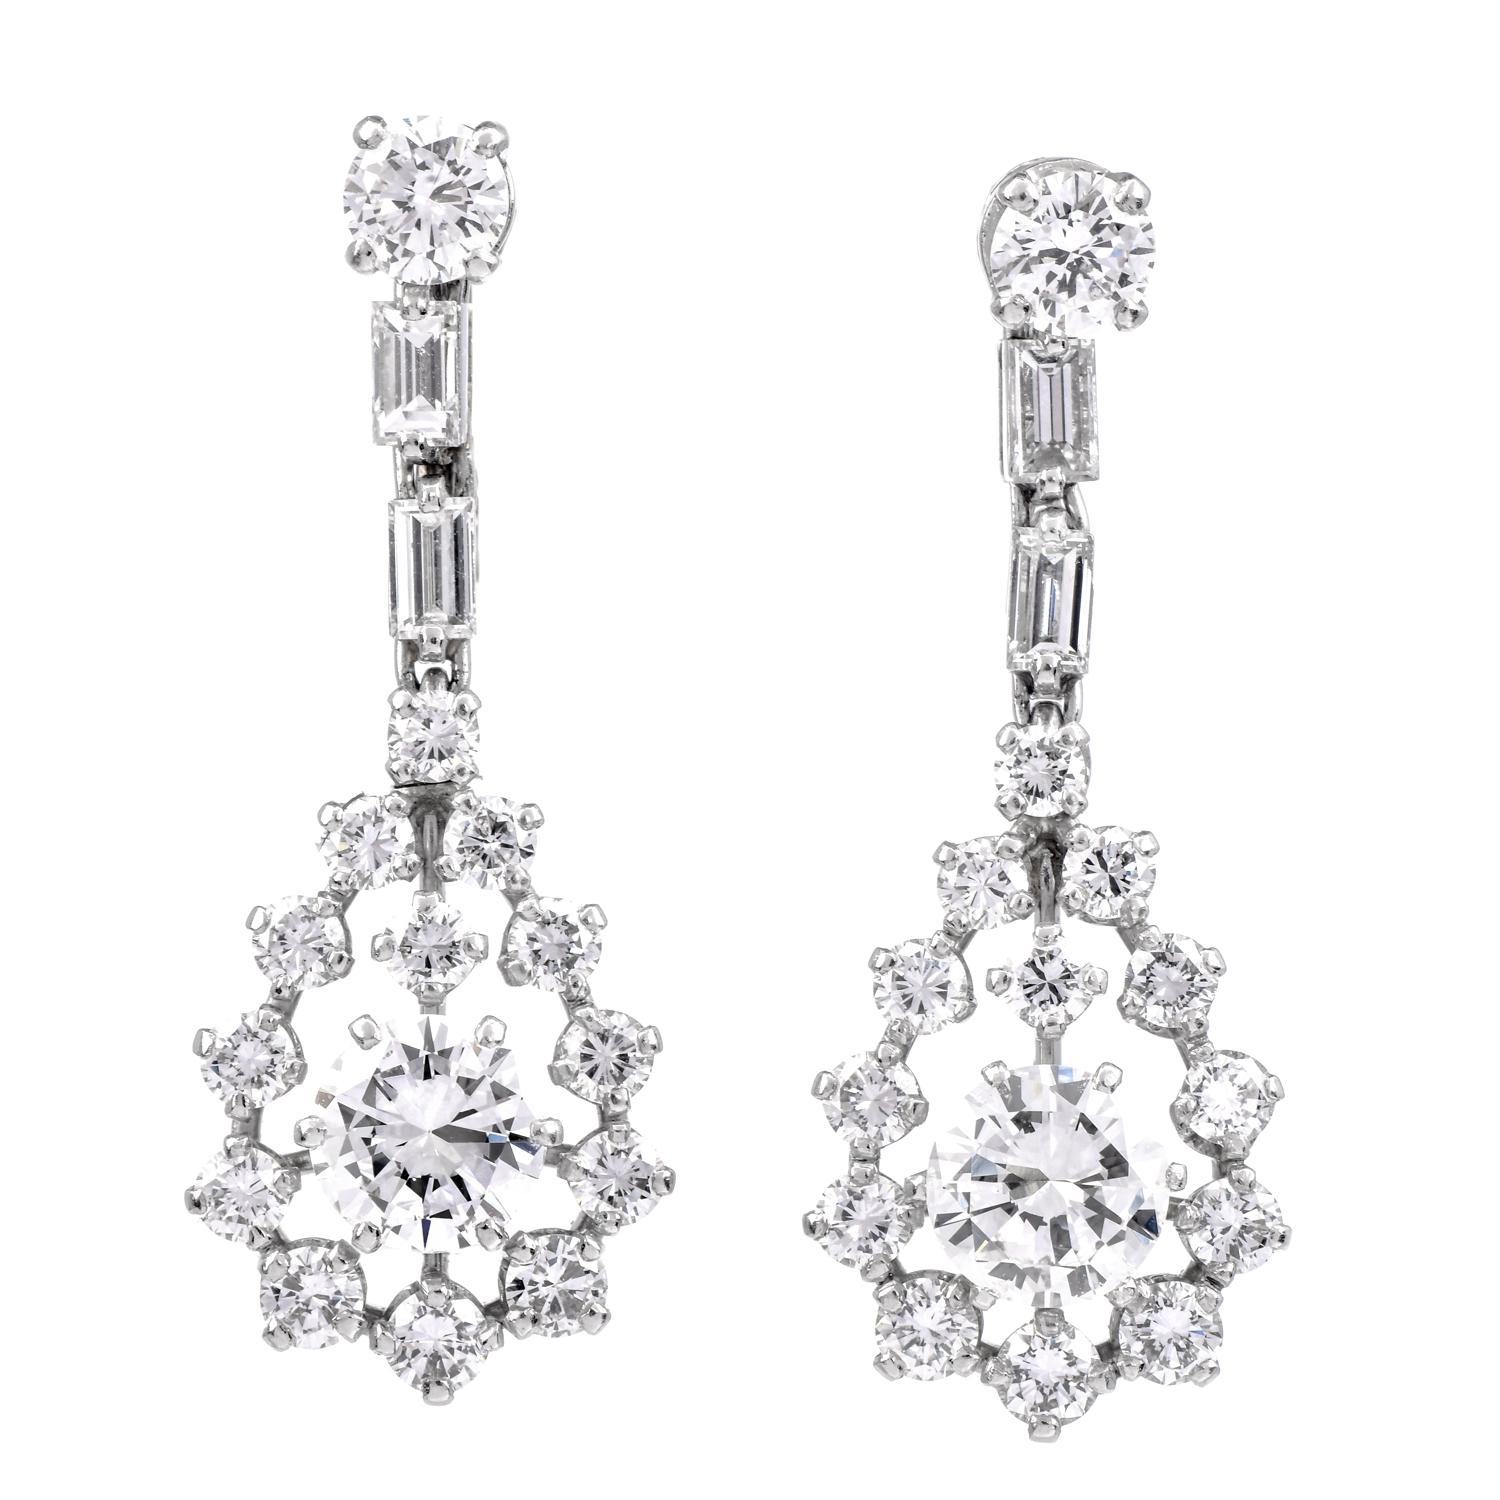 Presenting a beautiful pair of Platinum Diamond earrings. Teardrop dangling earrings adorned with 34 natural Brilliant round and Baguette diamonds. The two center diamonds are 2.10 carats in total. surrounding diamonds ranging from 0.09 carat to